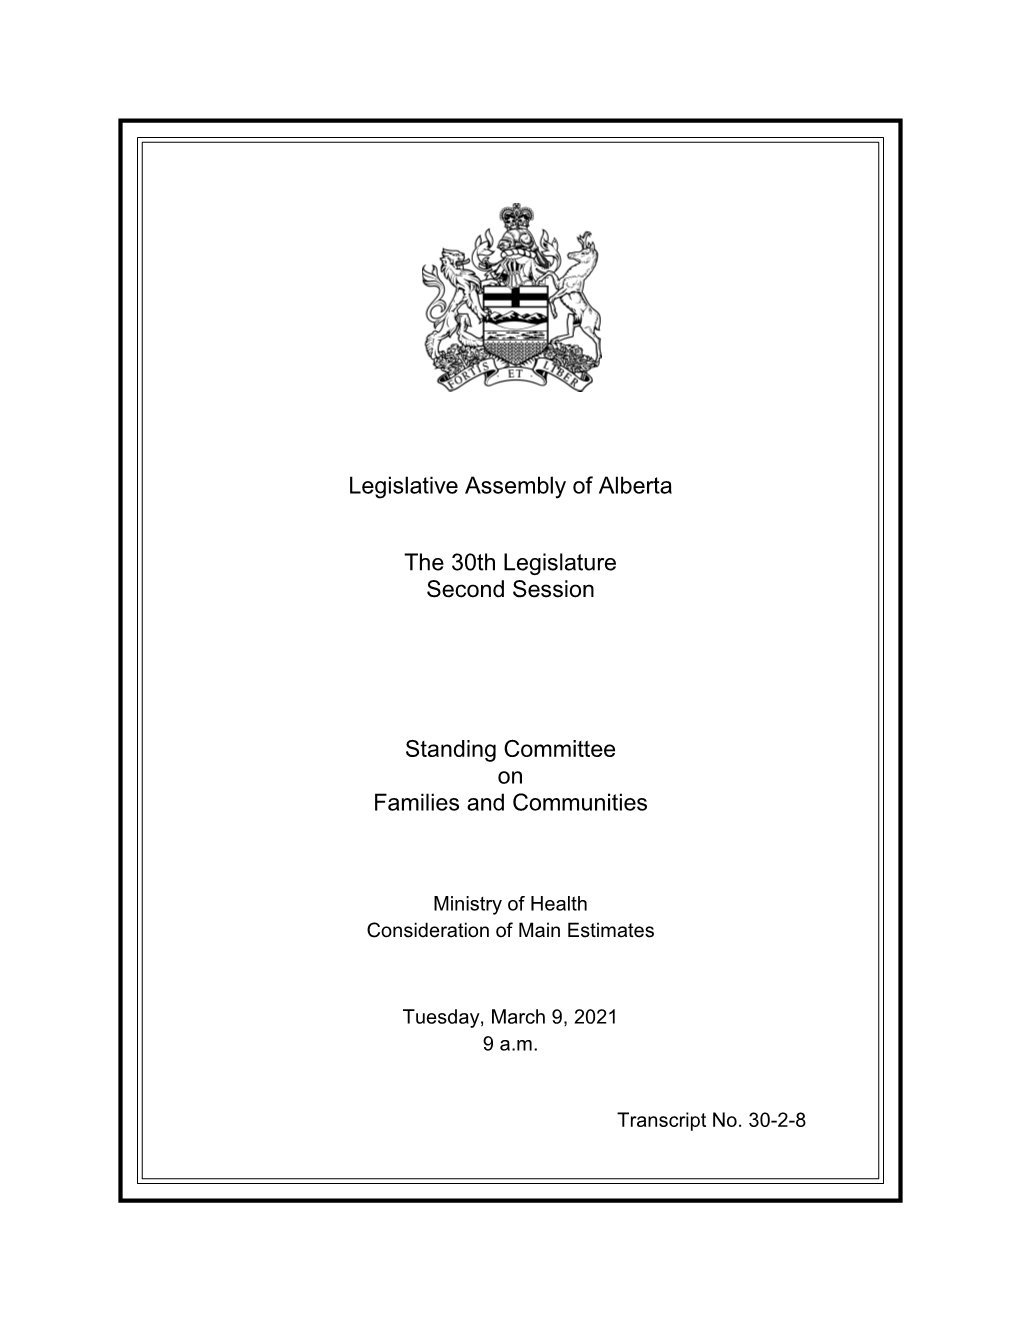 Legislative Assembly of Alberta the 30Th Legislature Second Session Standing Committee on Families and Communities